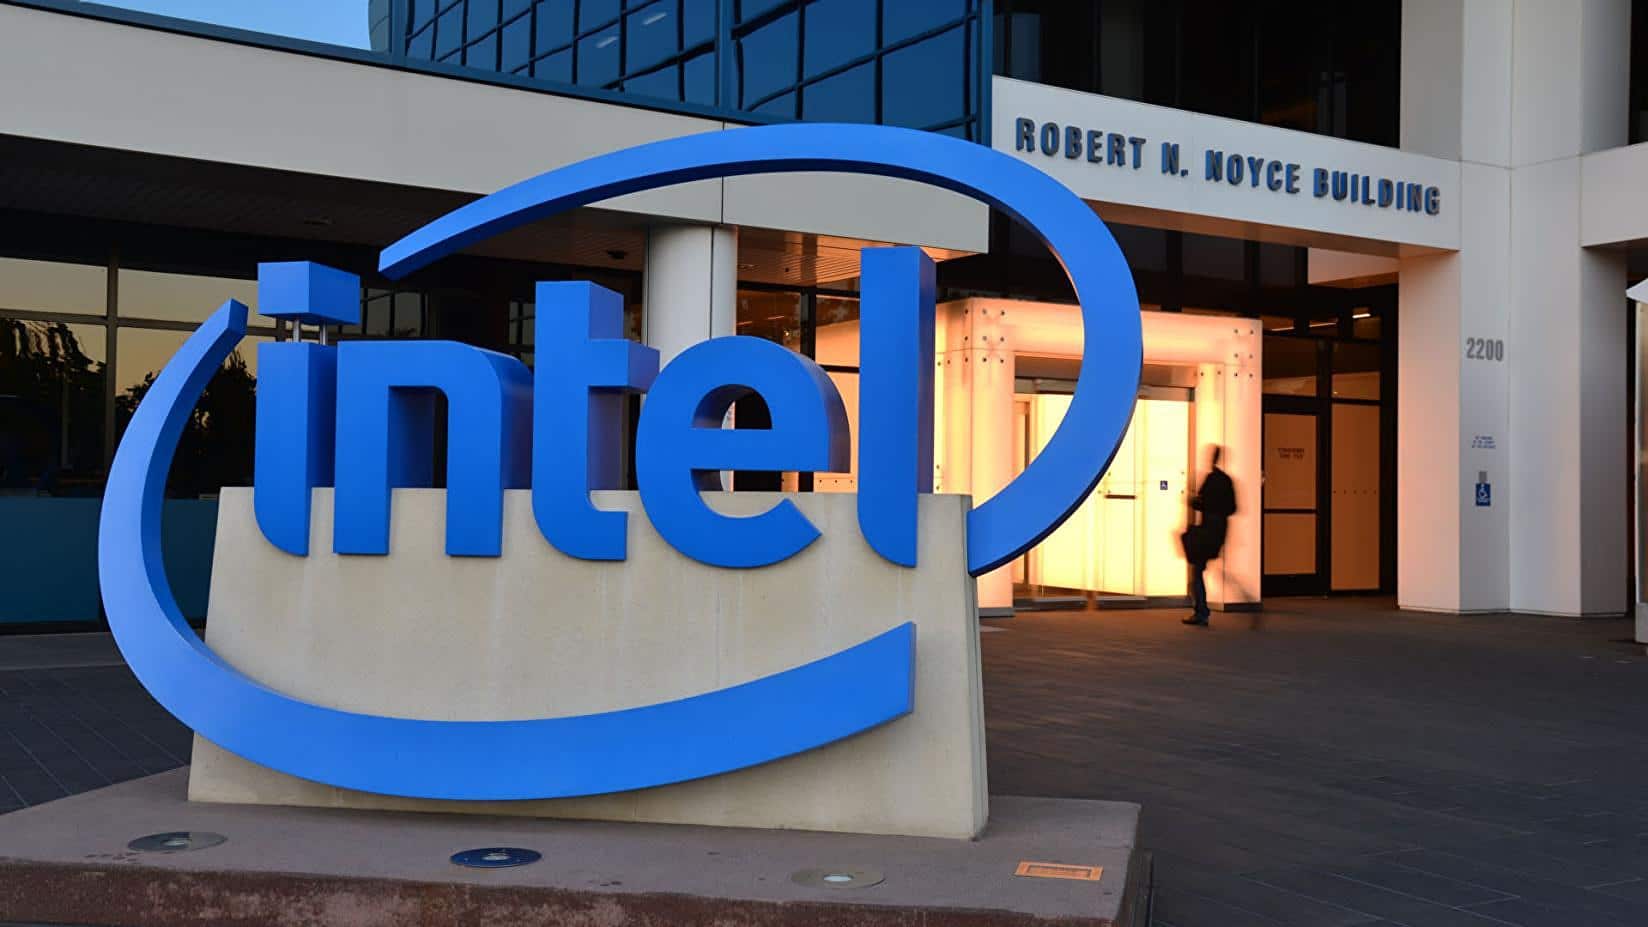 Intel have now suspended all operations in Russia, not just product shipments